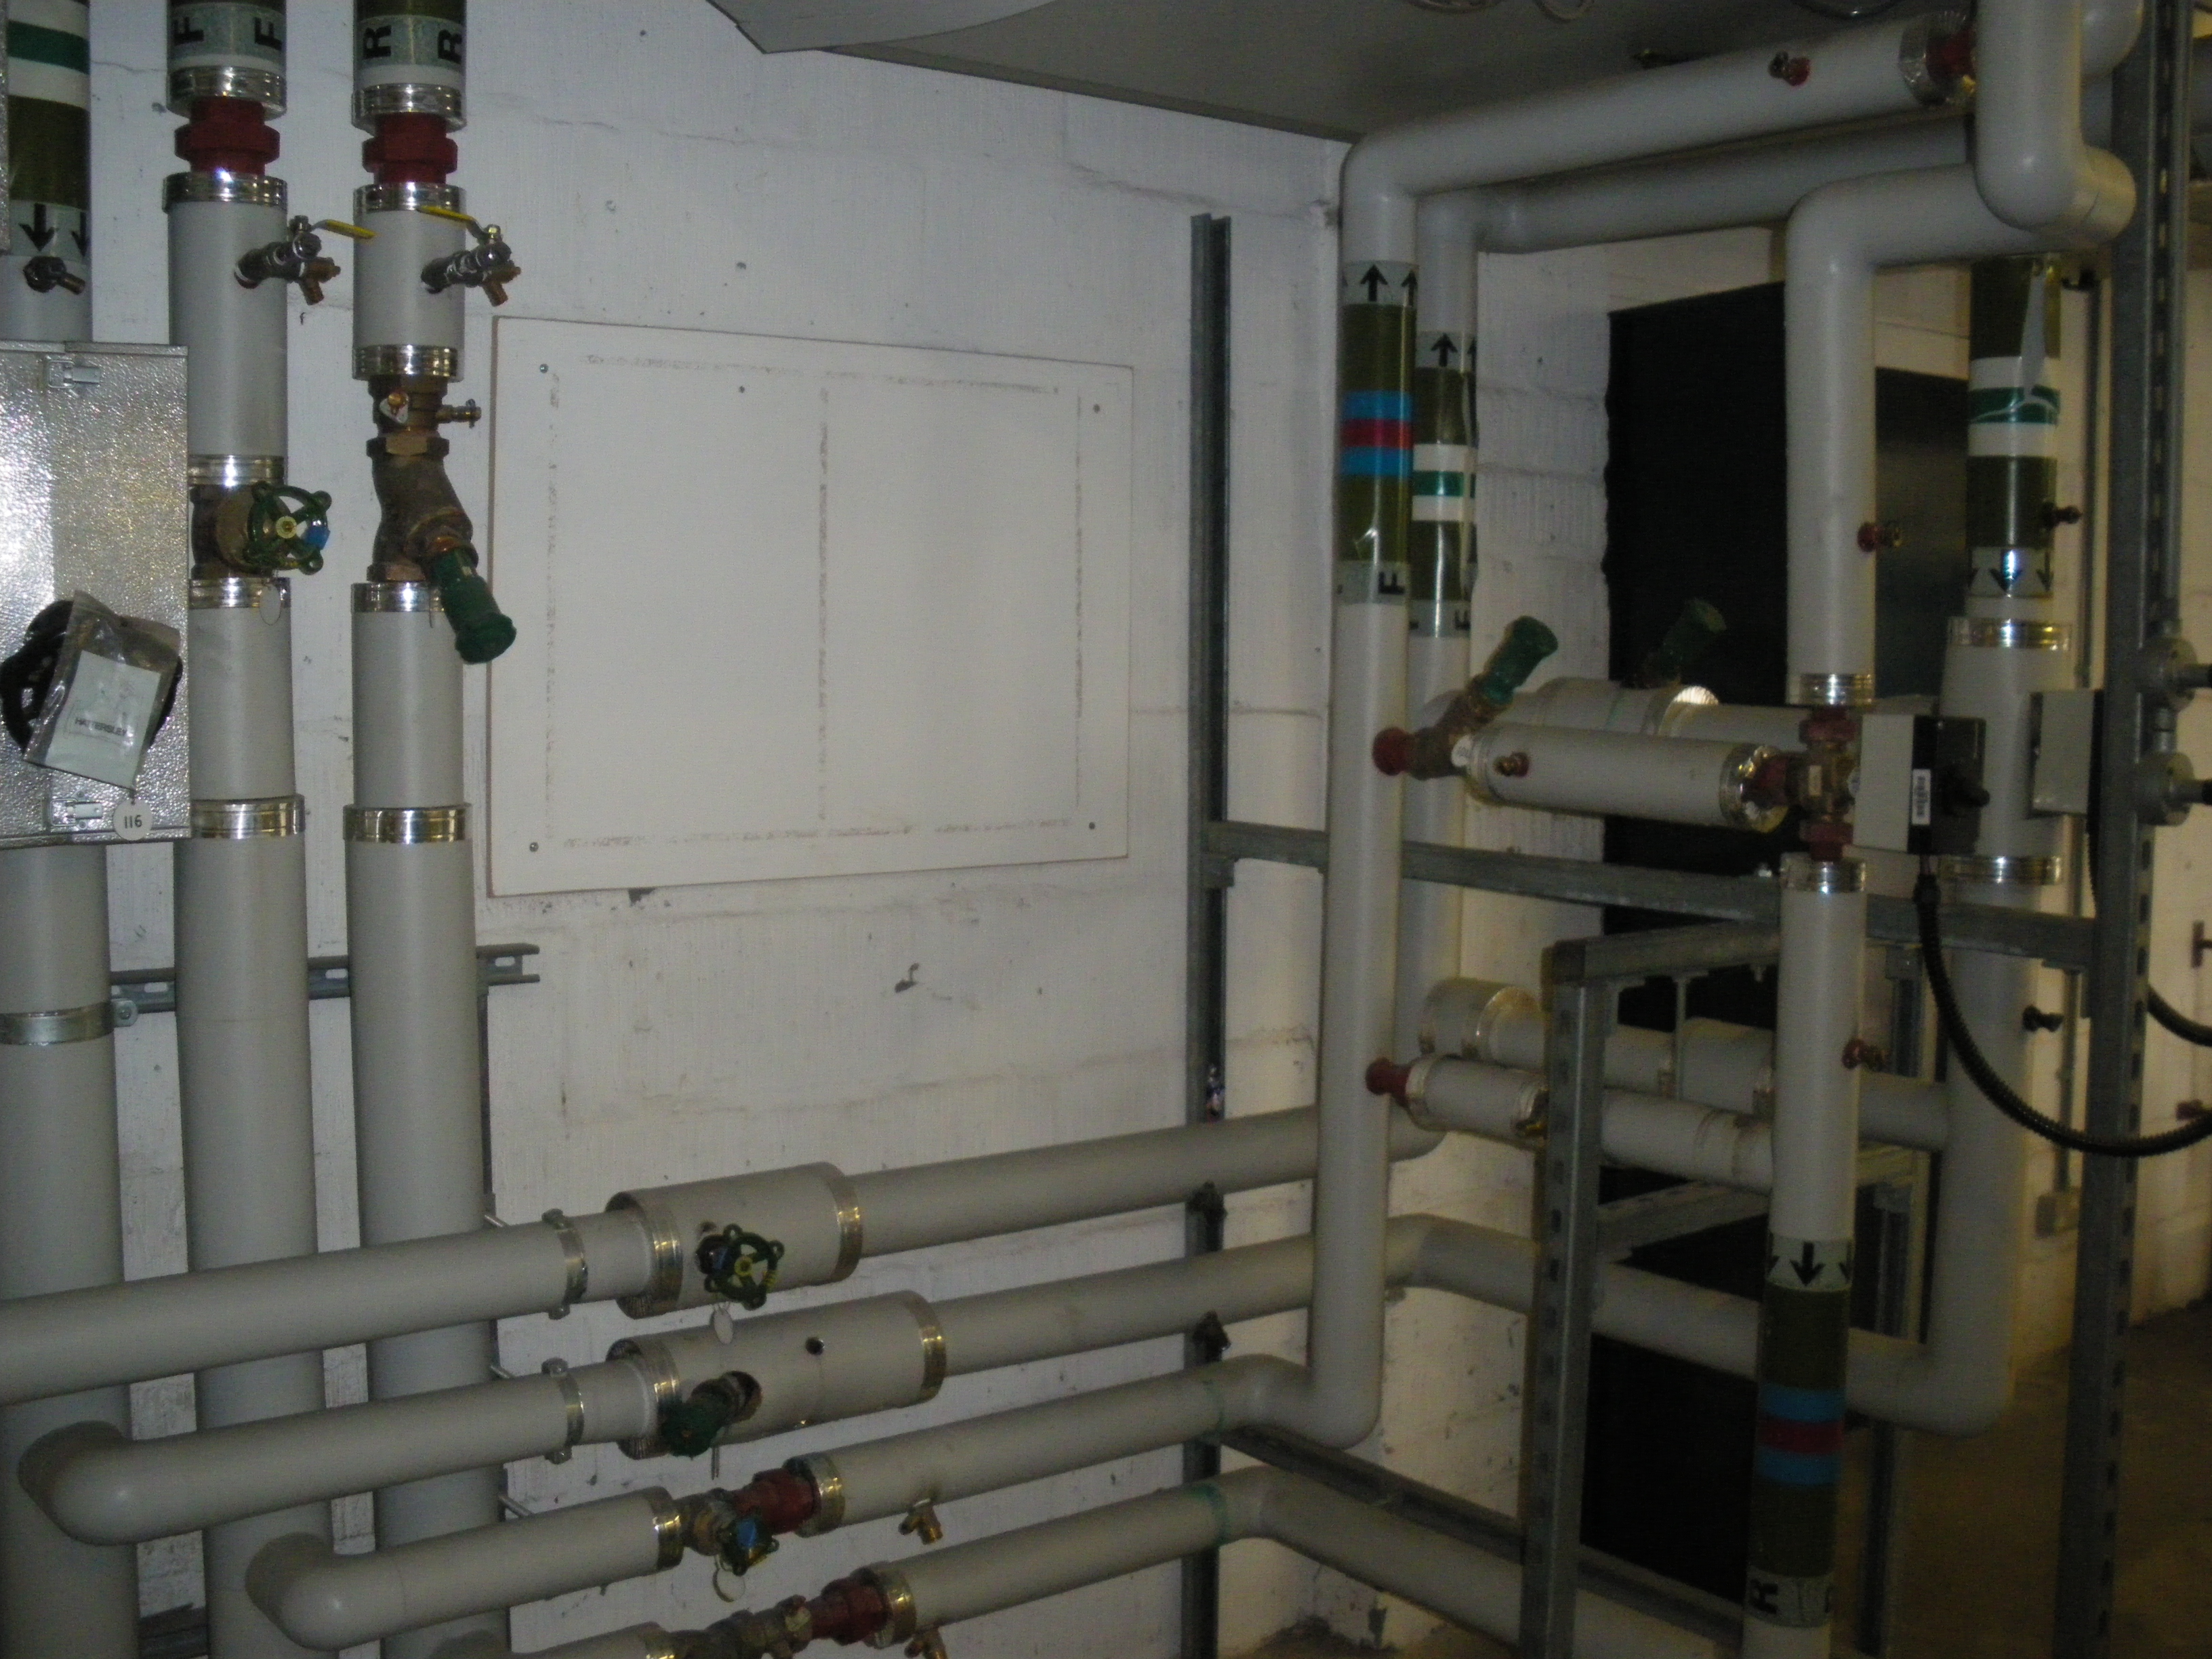 Pipes and valves for heating/chilled water in the Business Centre vent plant